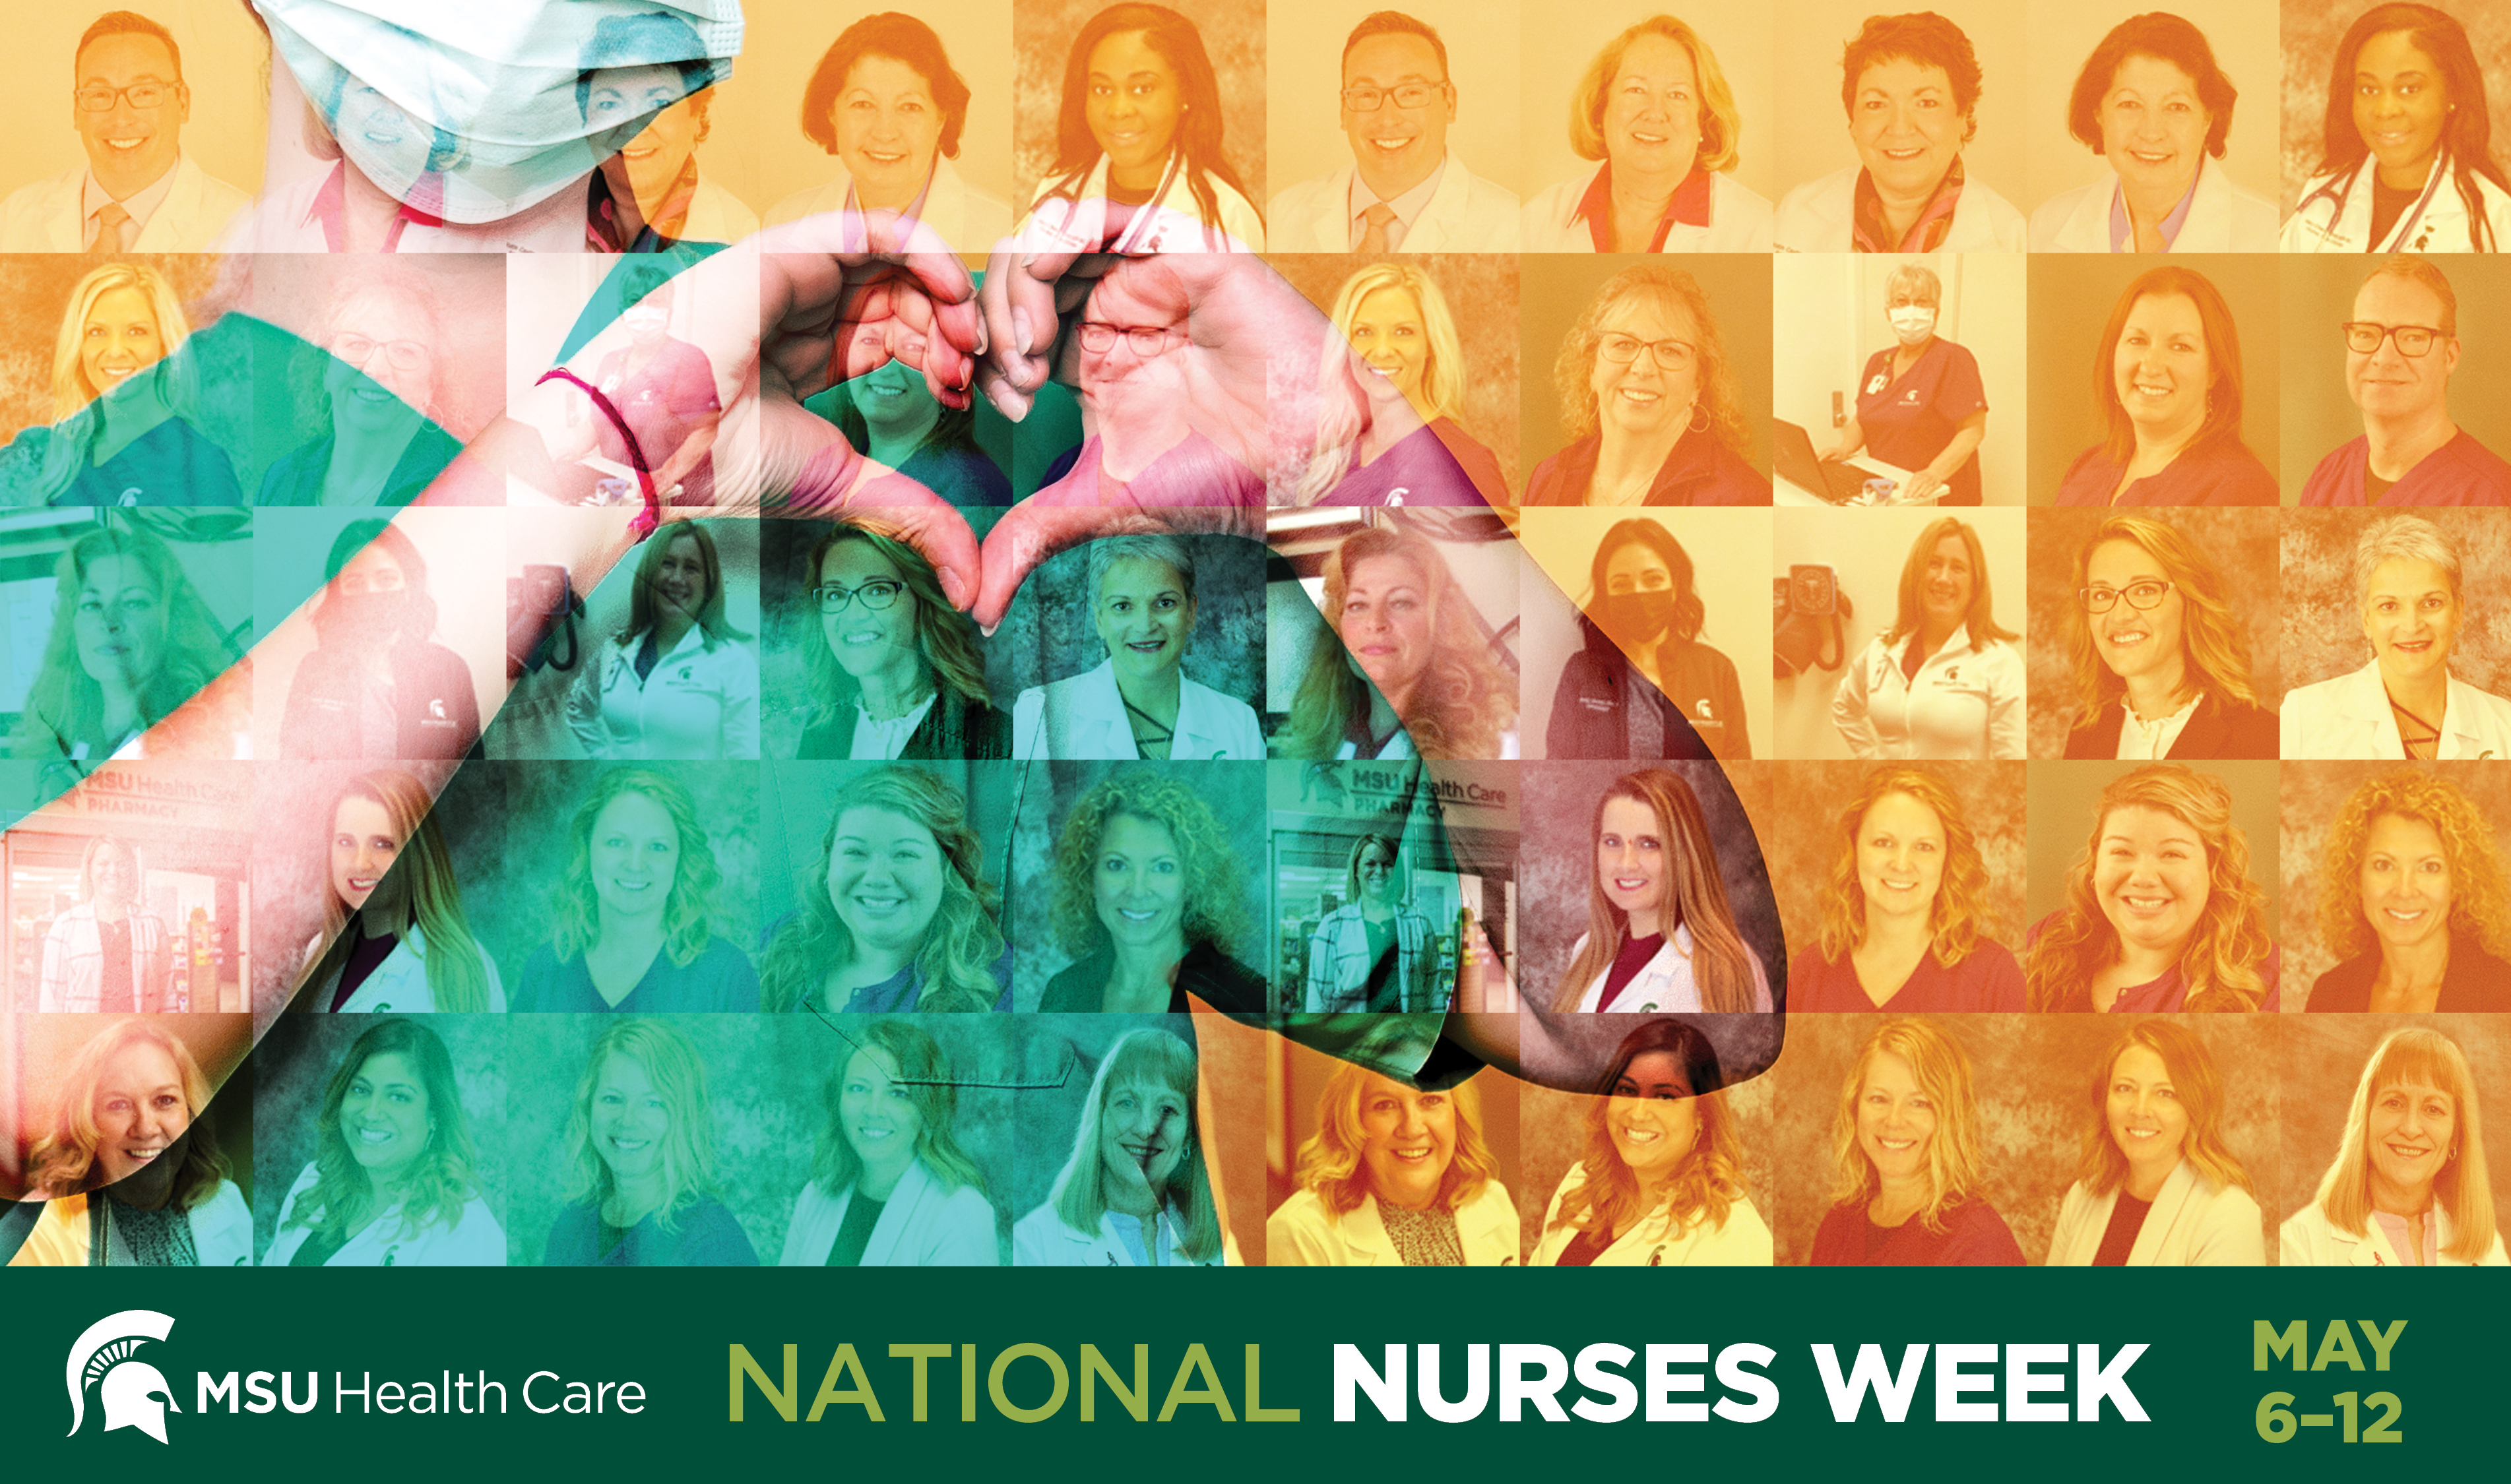 Rooted in Strength: Paying tribute to MSU Health Care nurses during National Nurses Week